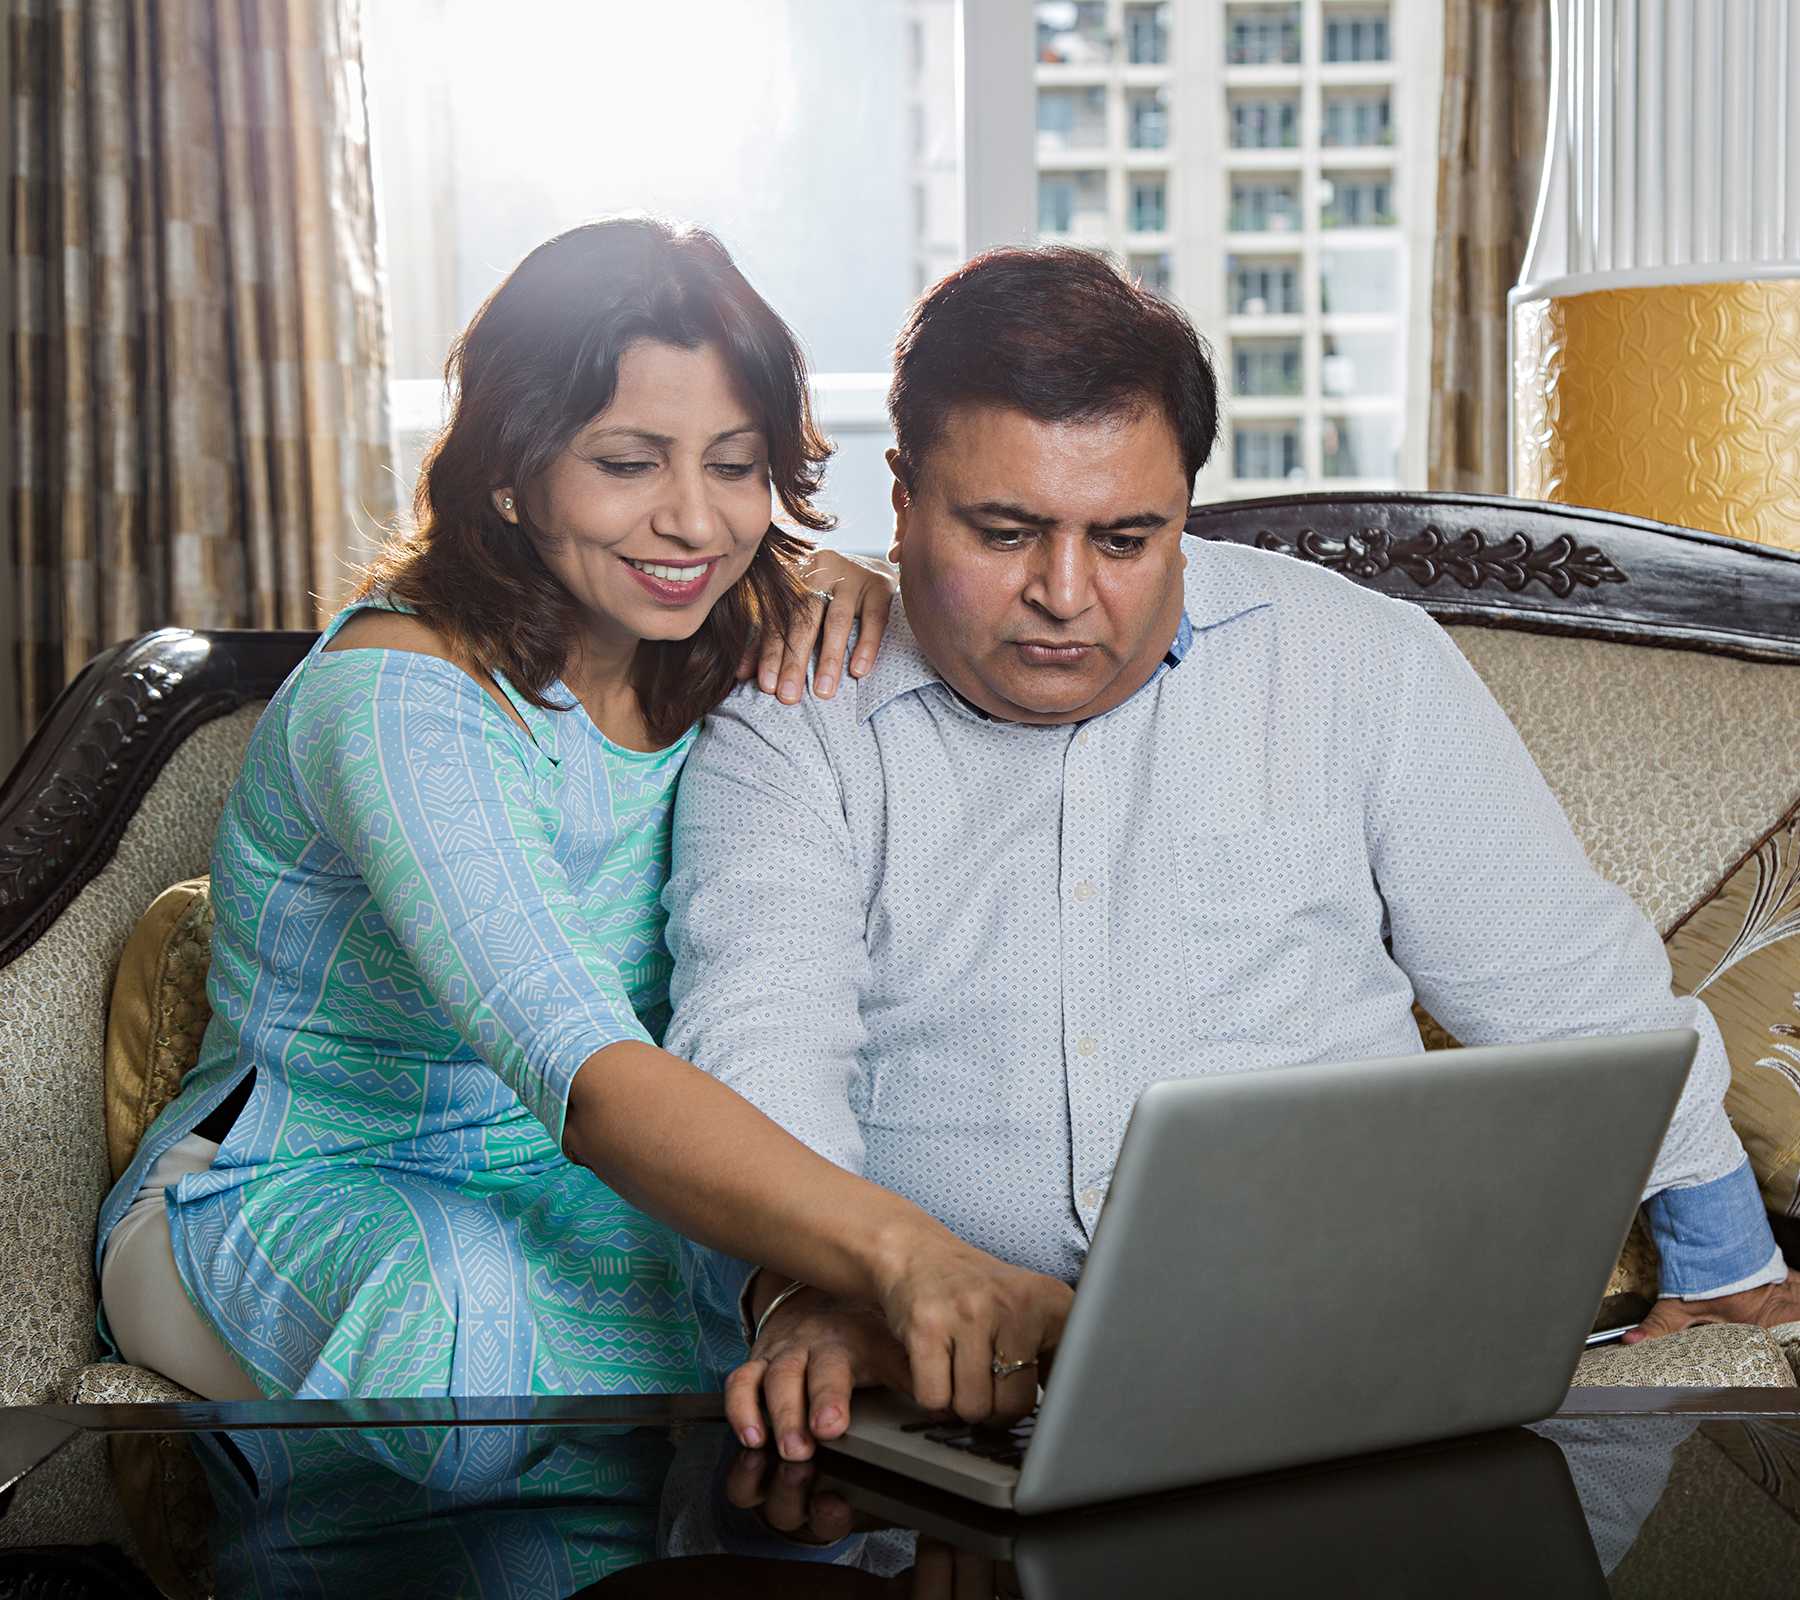 Asian/Indian woman and man looking at a laptop screen. The women points at something on the screen.